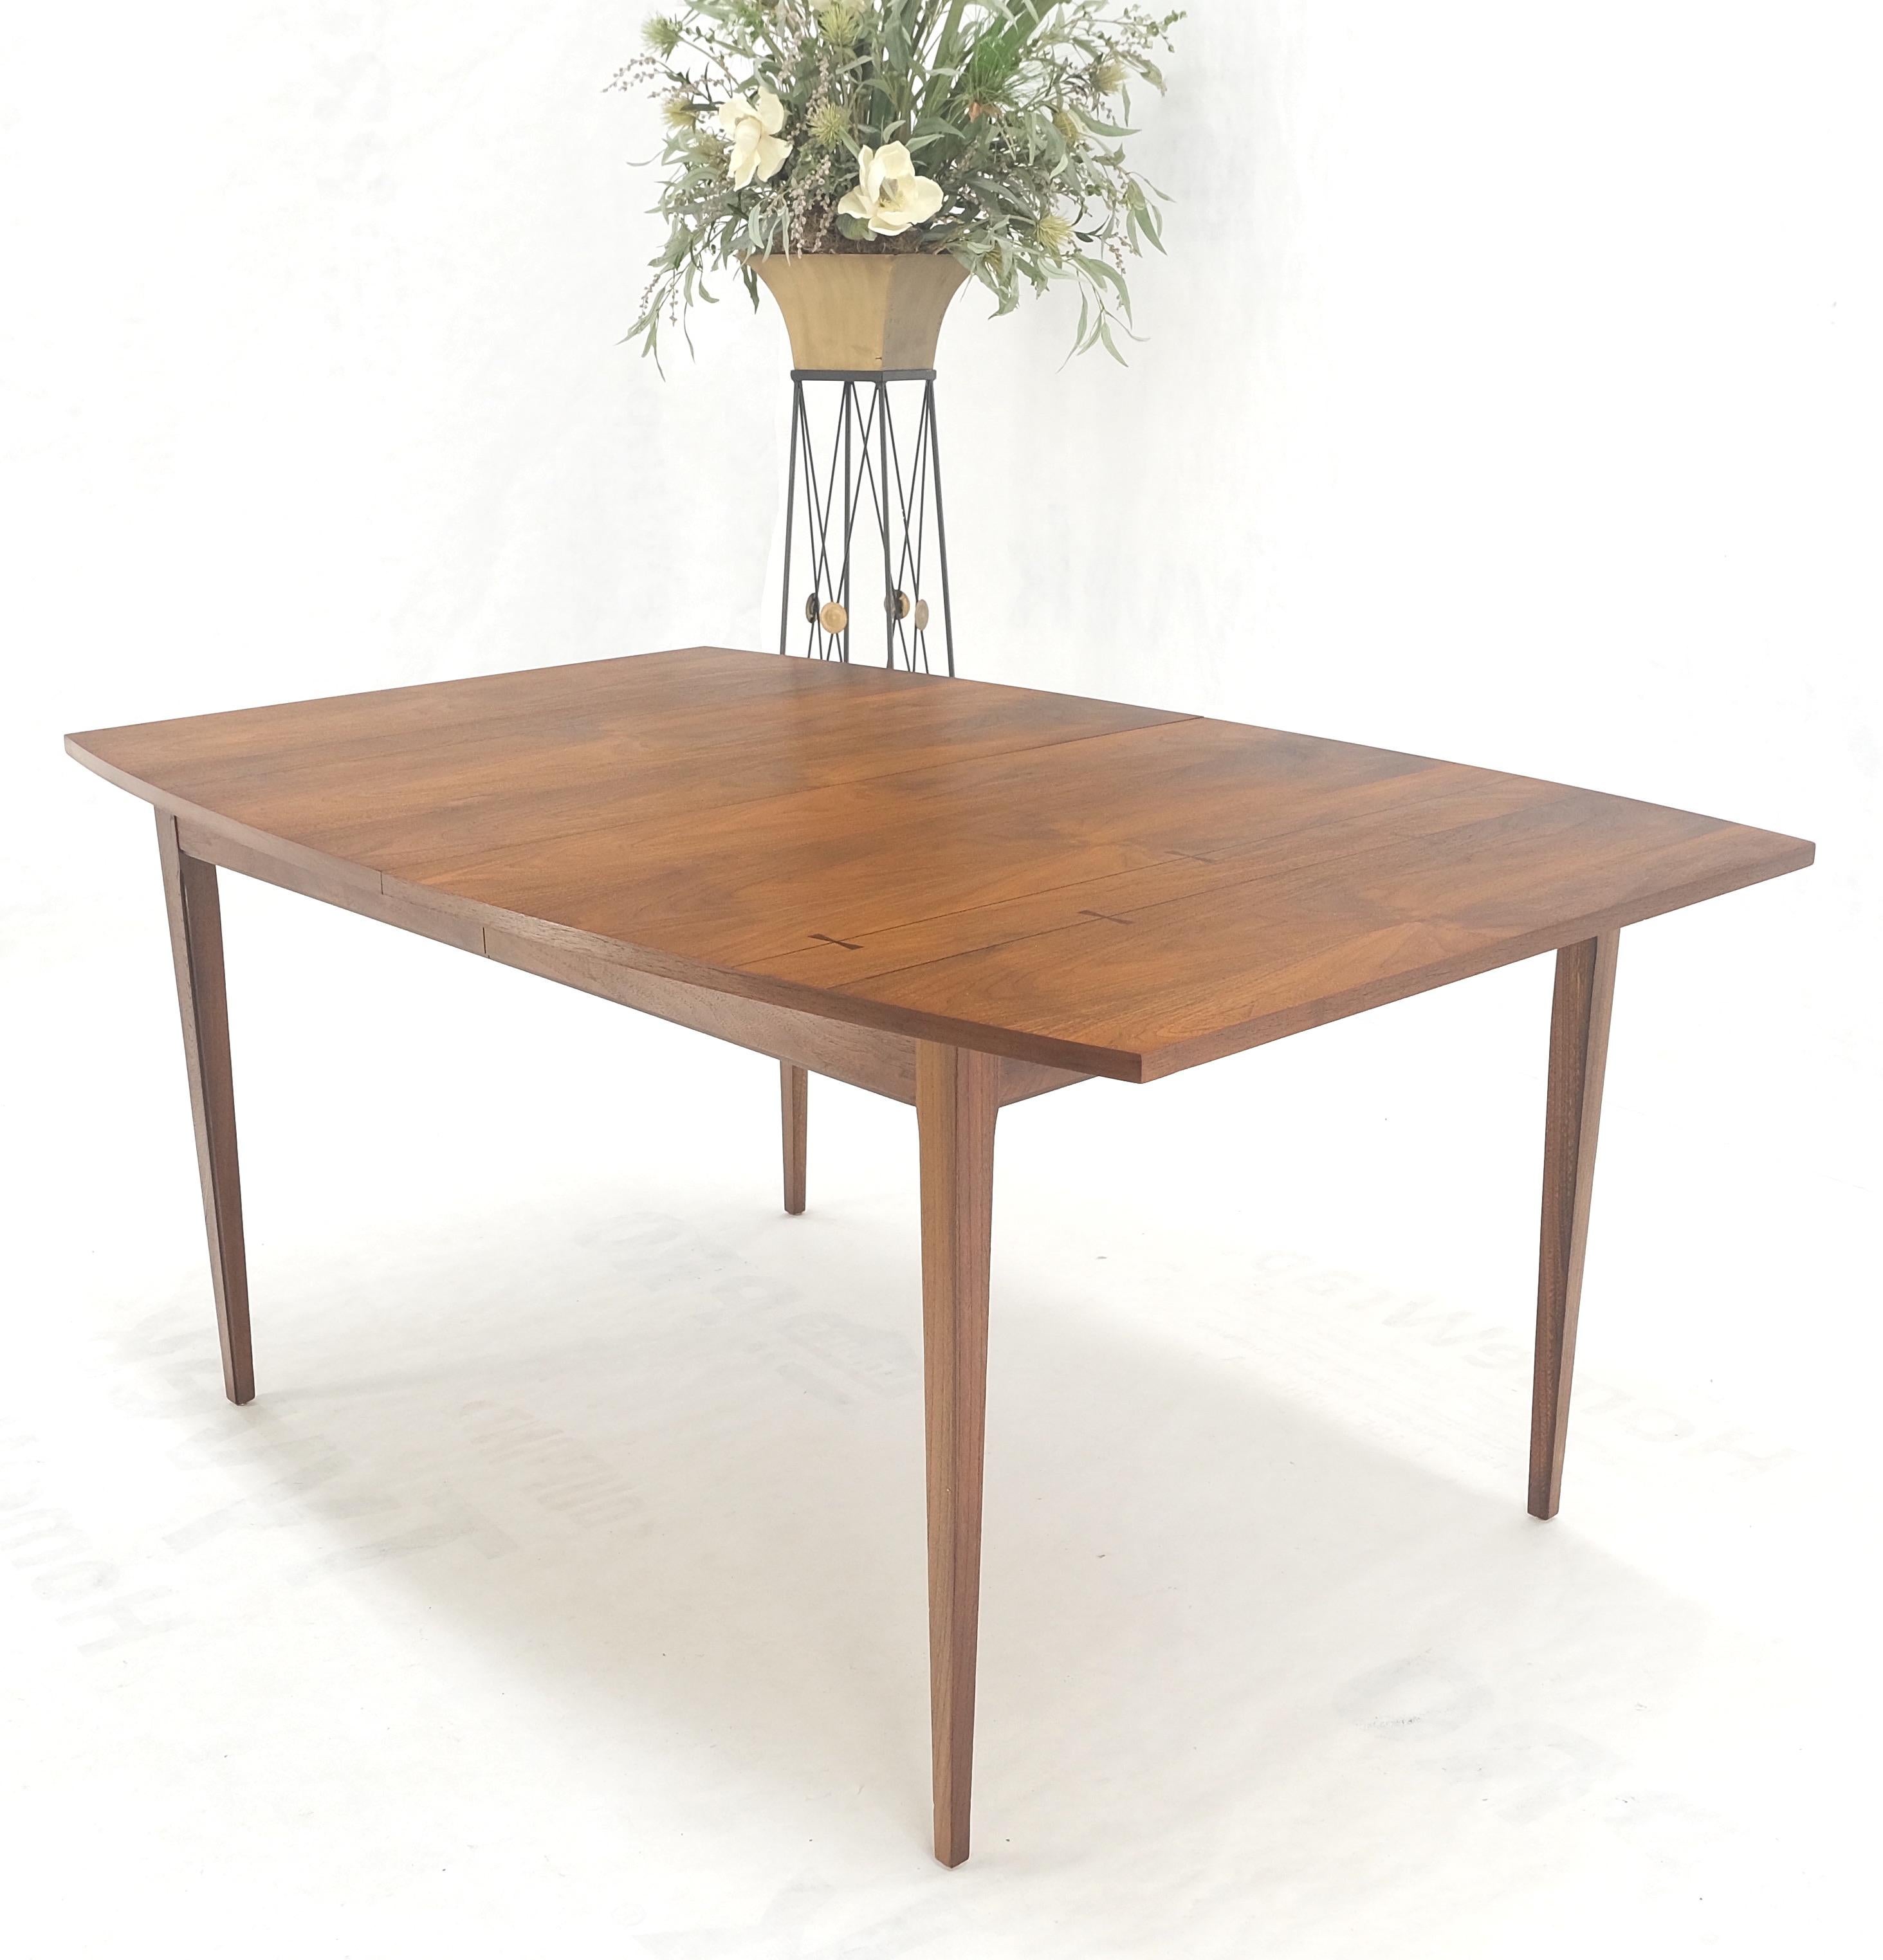 American Danish Mid Century Modern Walnut Butterfly Accents Boat Shape Dining Table MINT! For Sale